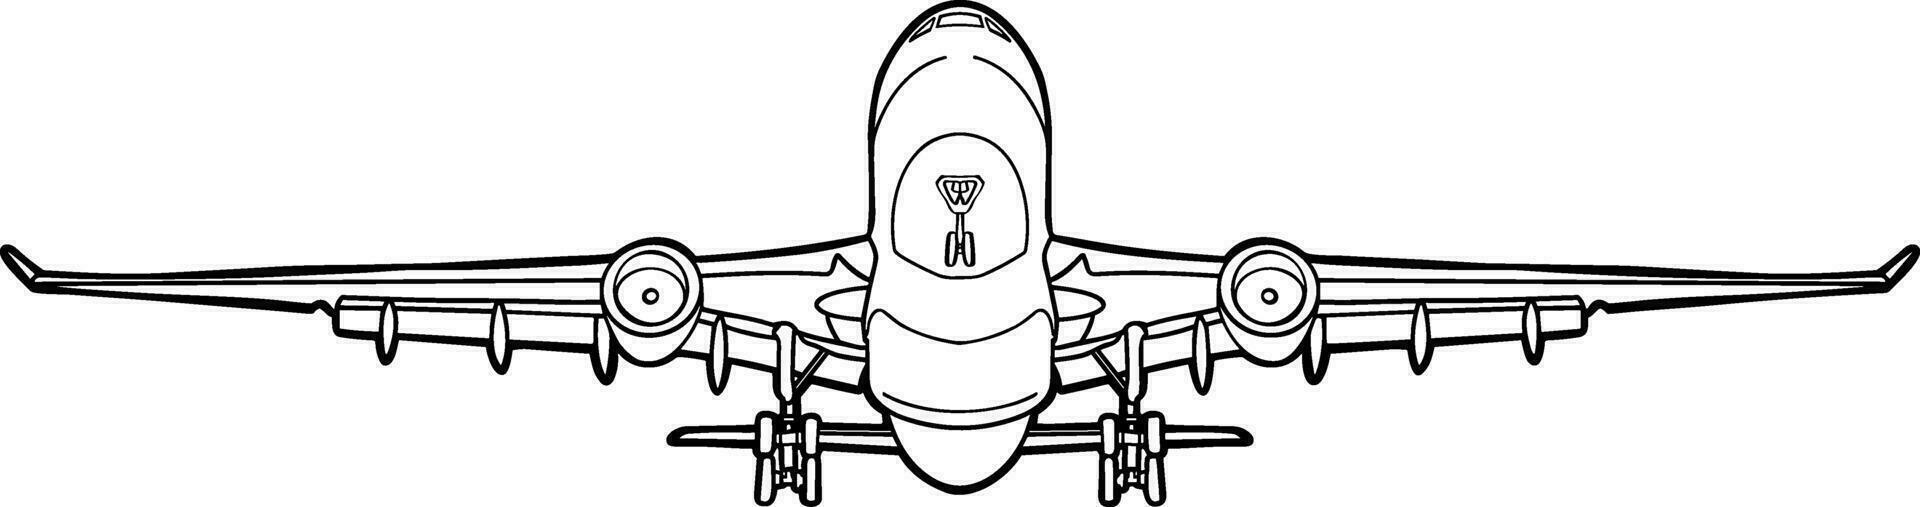 airplane front take off from runway vector